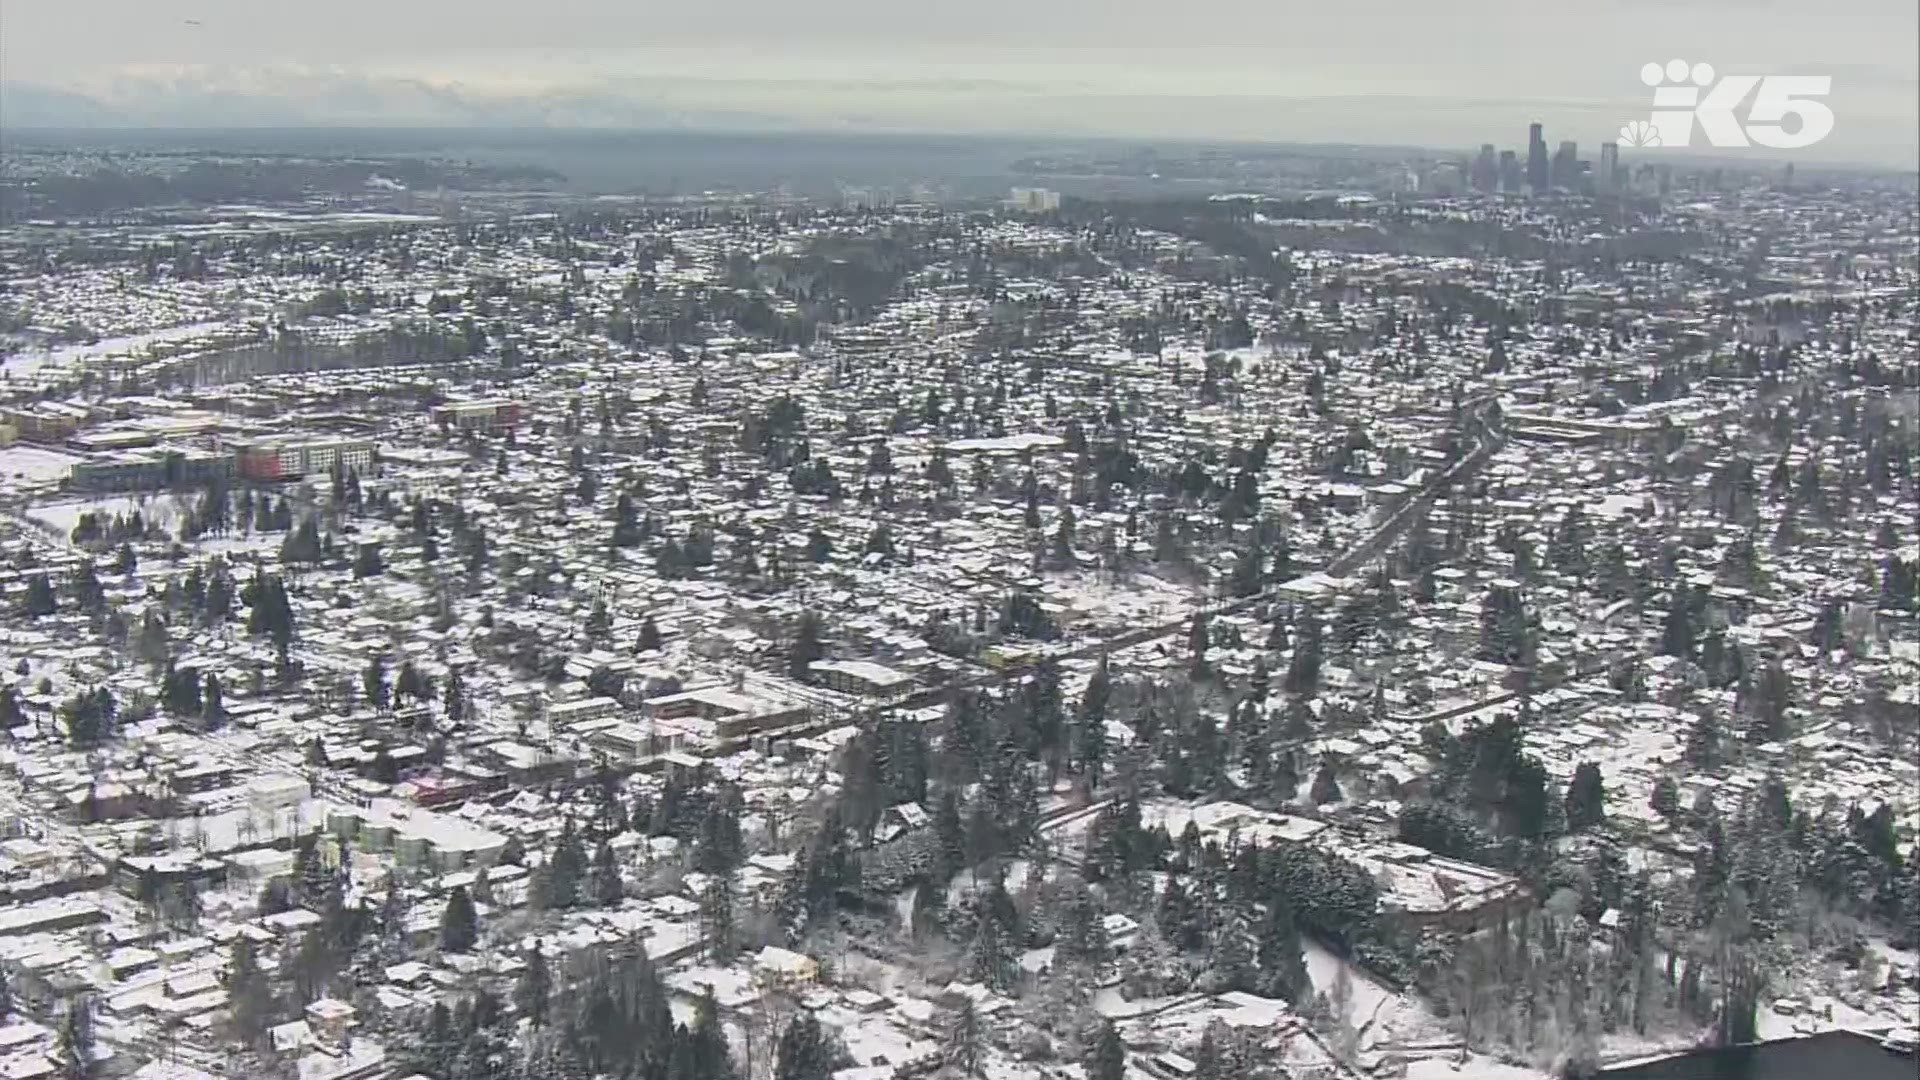 Take in a birds-eye view of snow-covered landscapes across Western Washington.